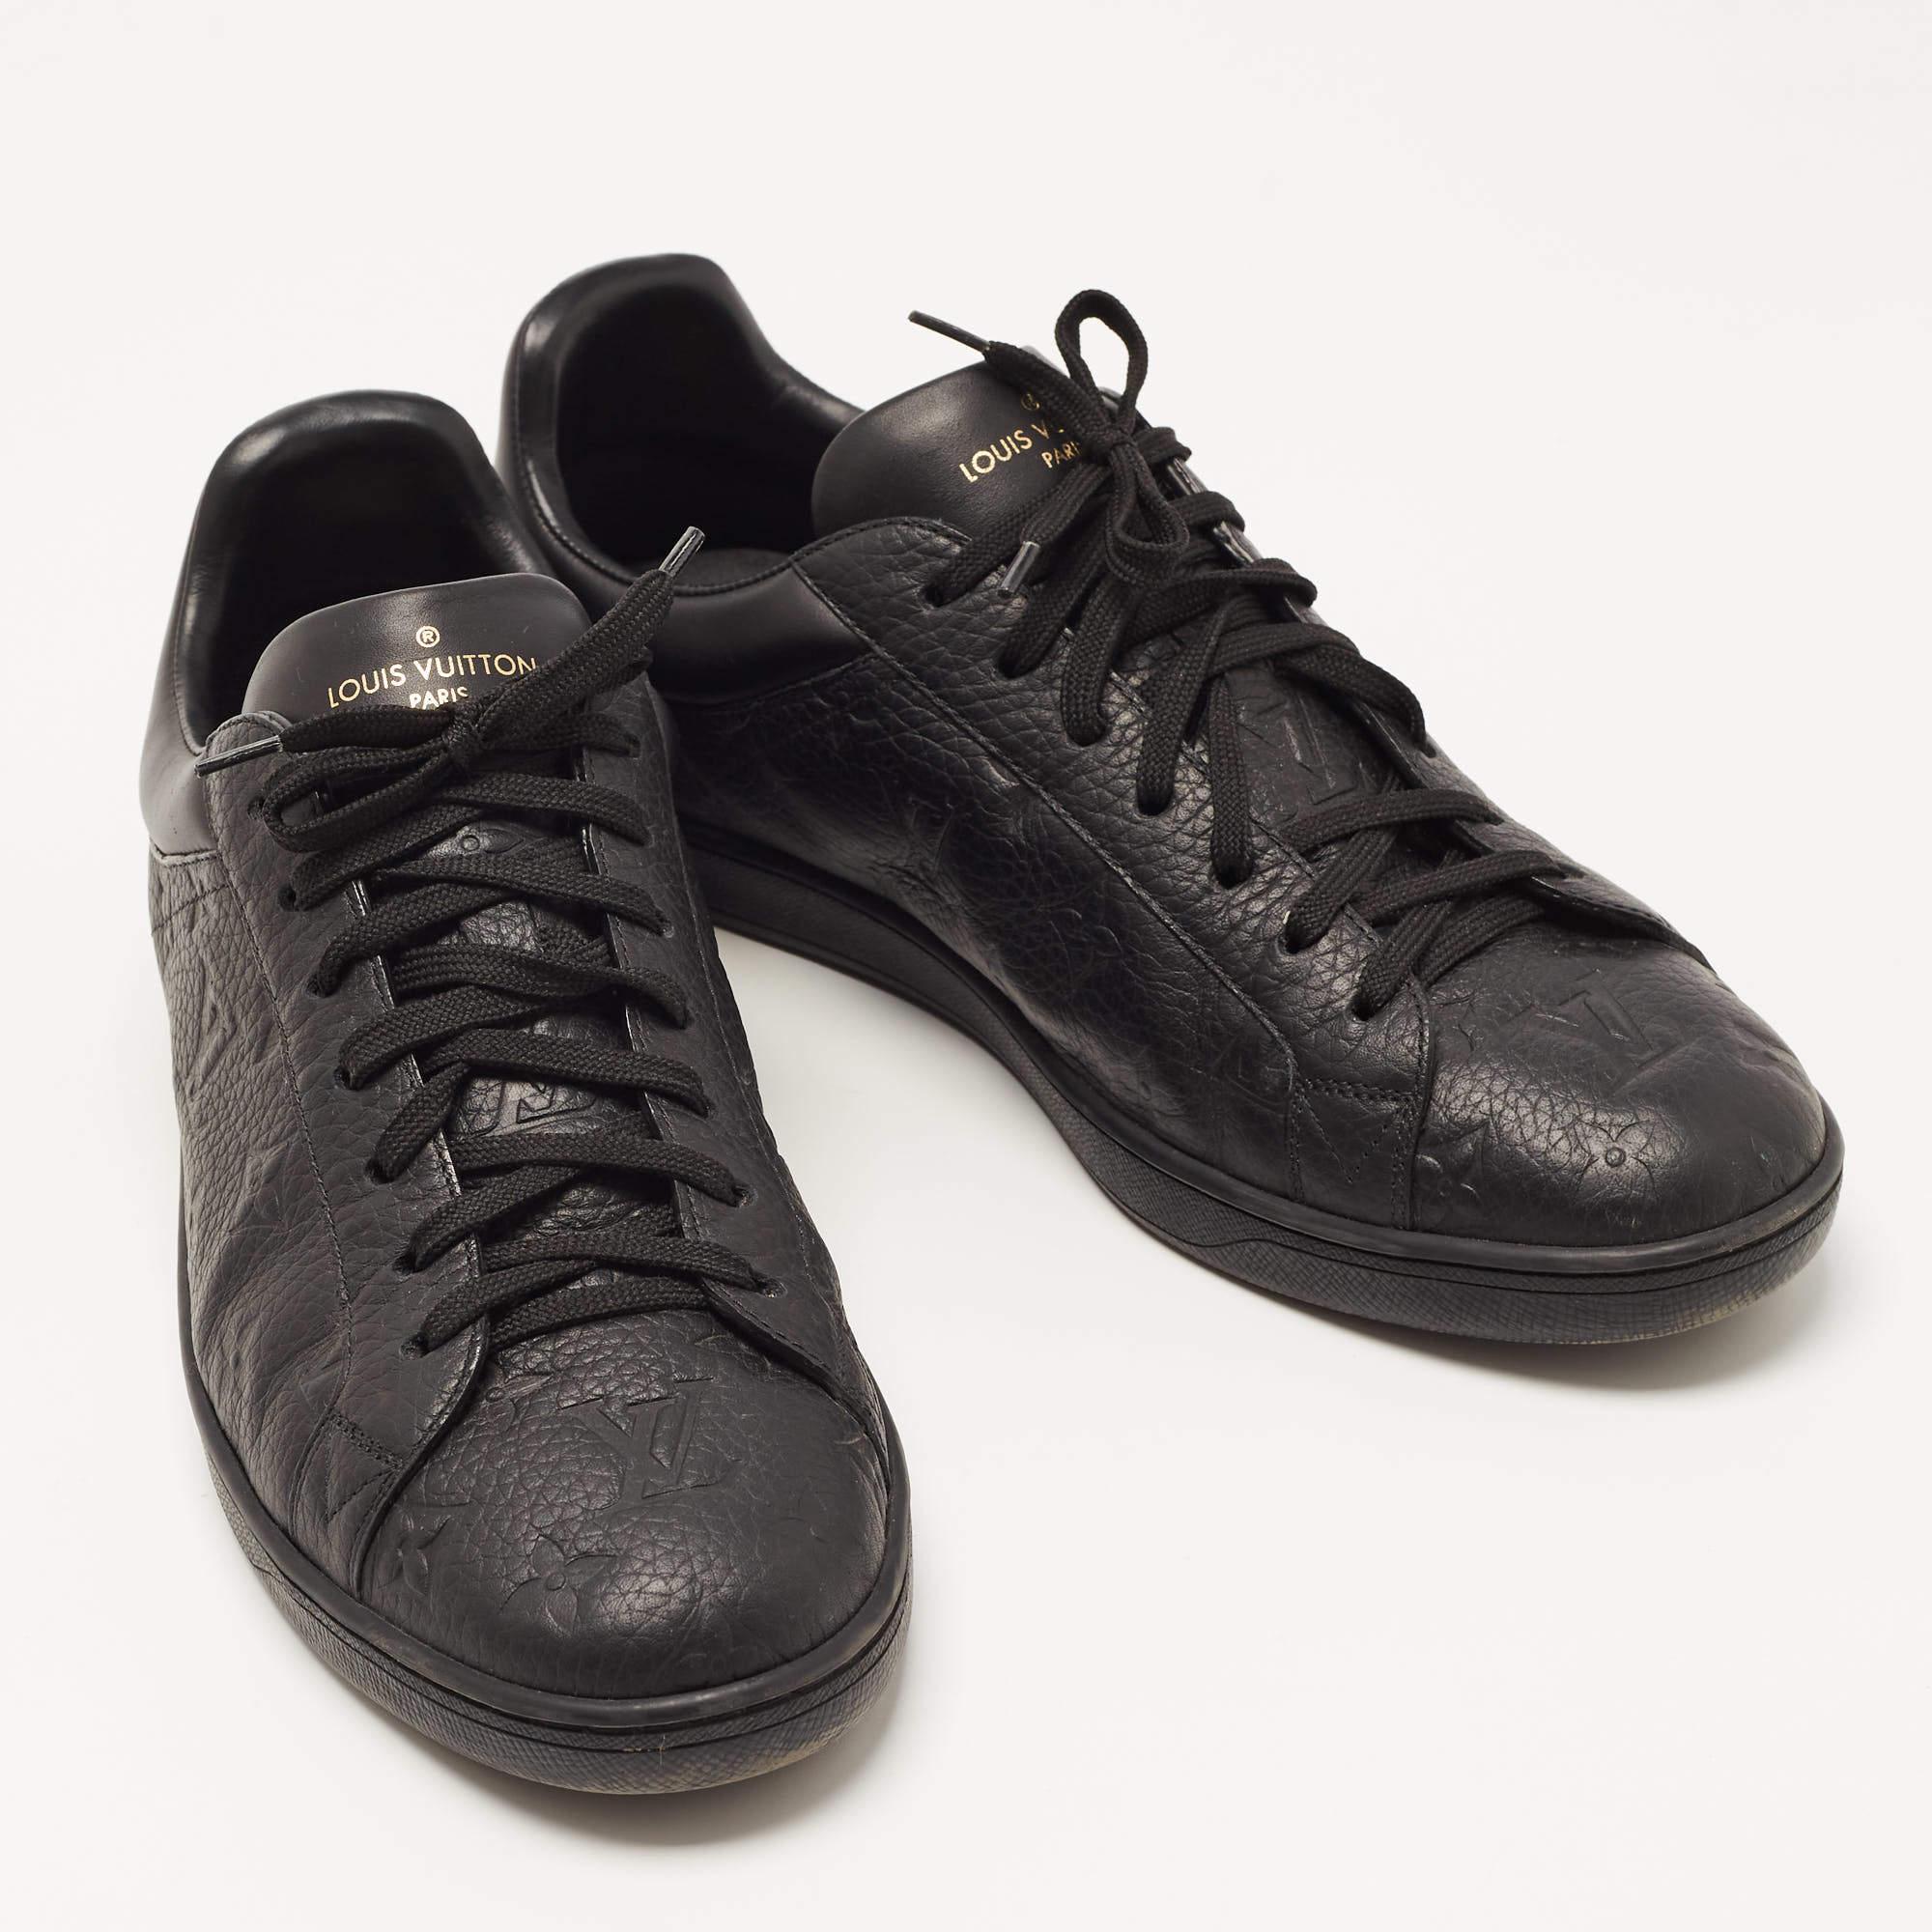 Louis Vuitton Black Monogram Leather Luxembourg Sneakers Size 43 2